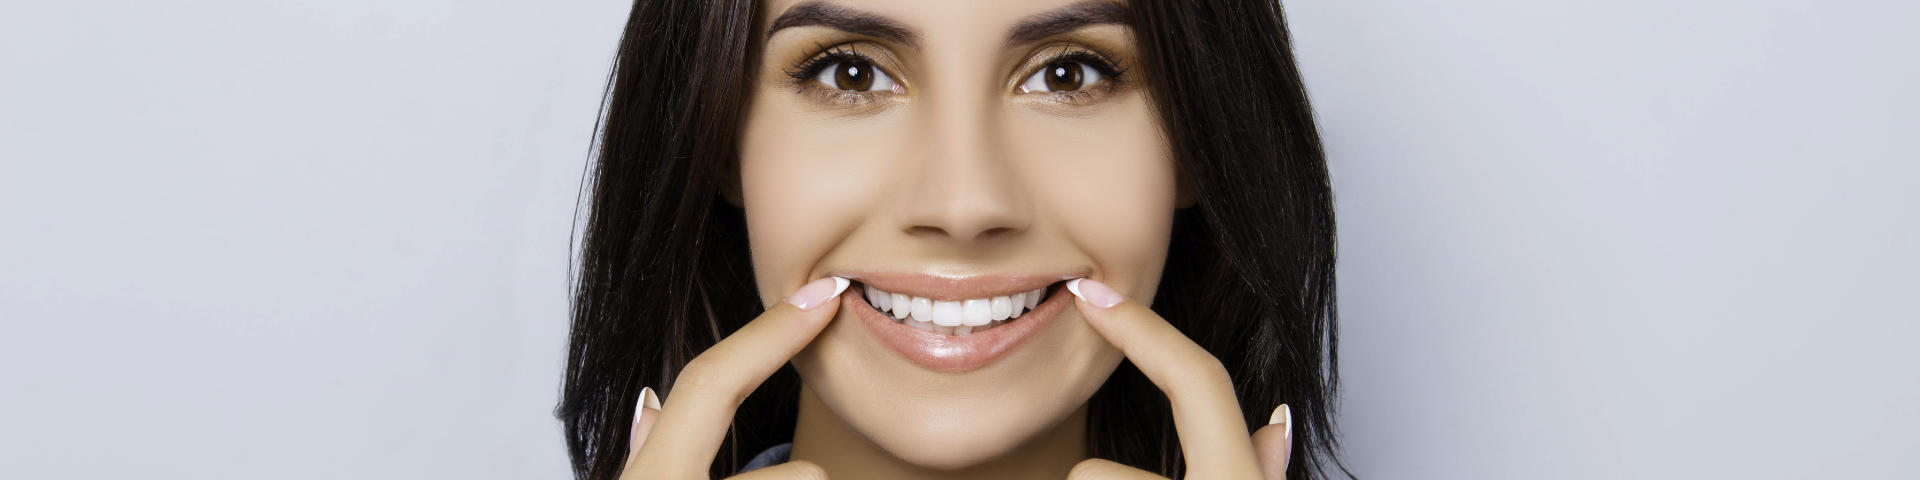 Happy woman pointing at her whitened teeth.